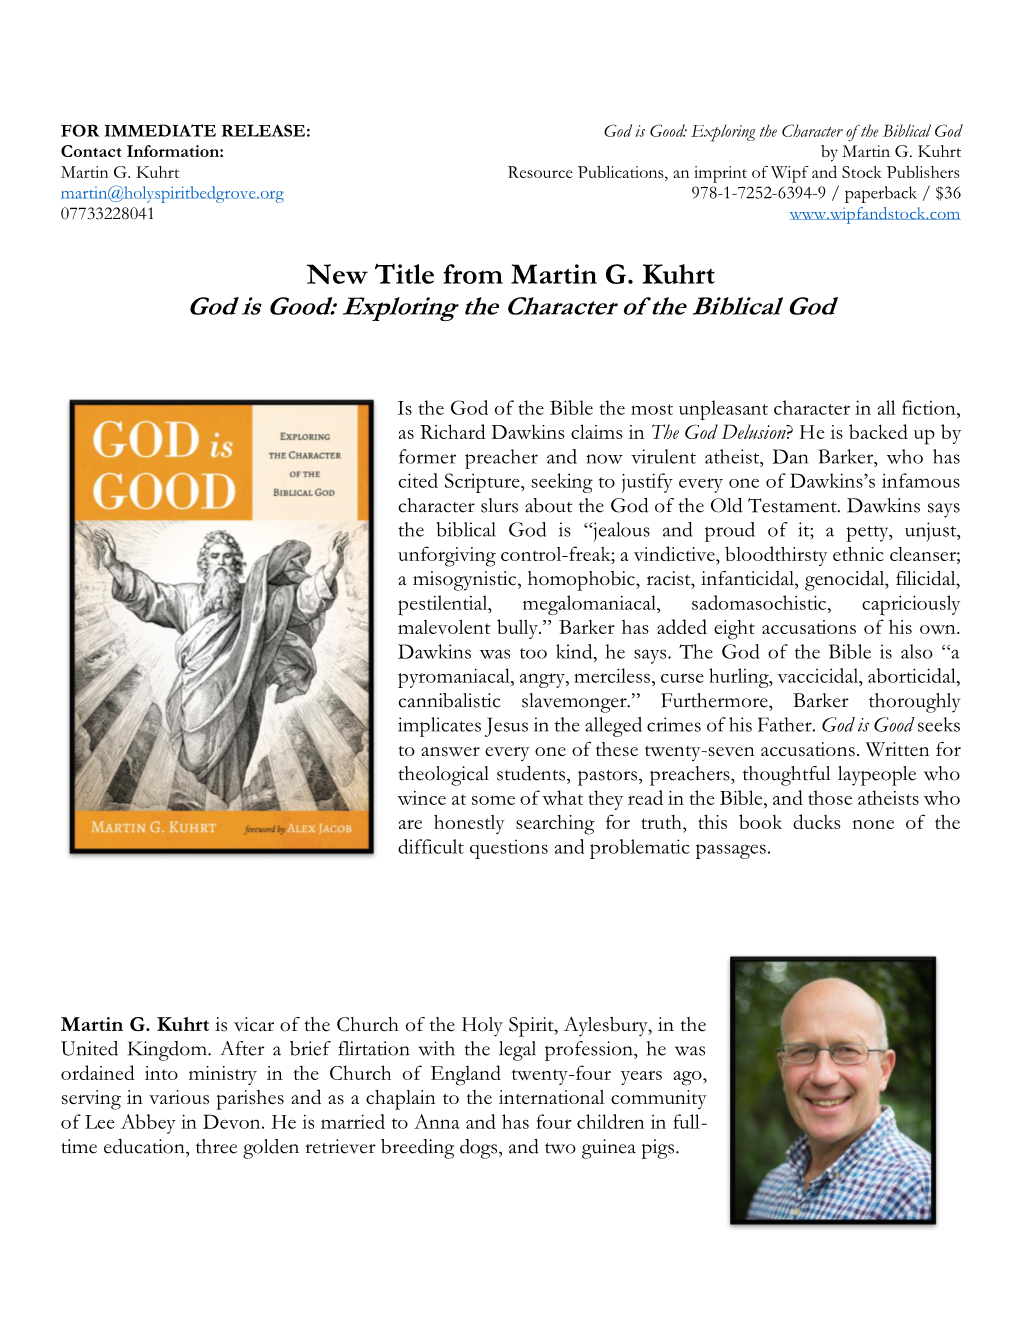 New Title from Martin G. Kuhrt God Is Good: Exploring the Character of the Biblical God